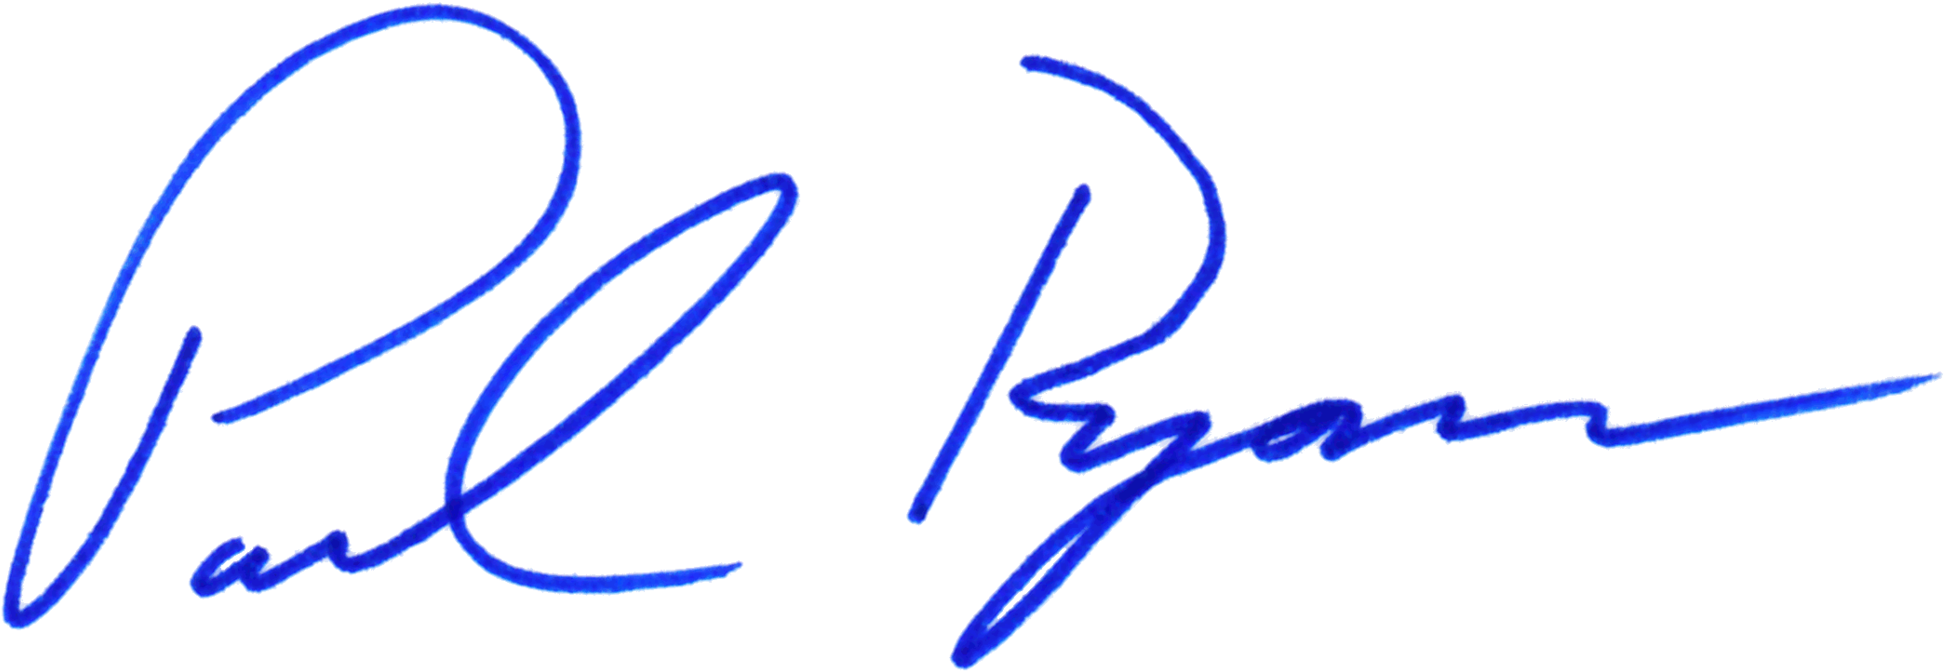 Download File - Ryan-signature - Paul Ryan Signature PNG Image with No  Background 